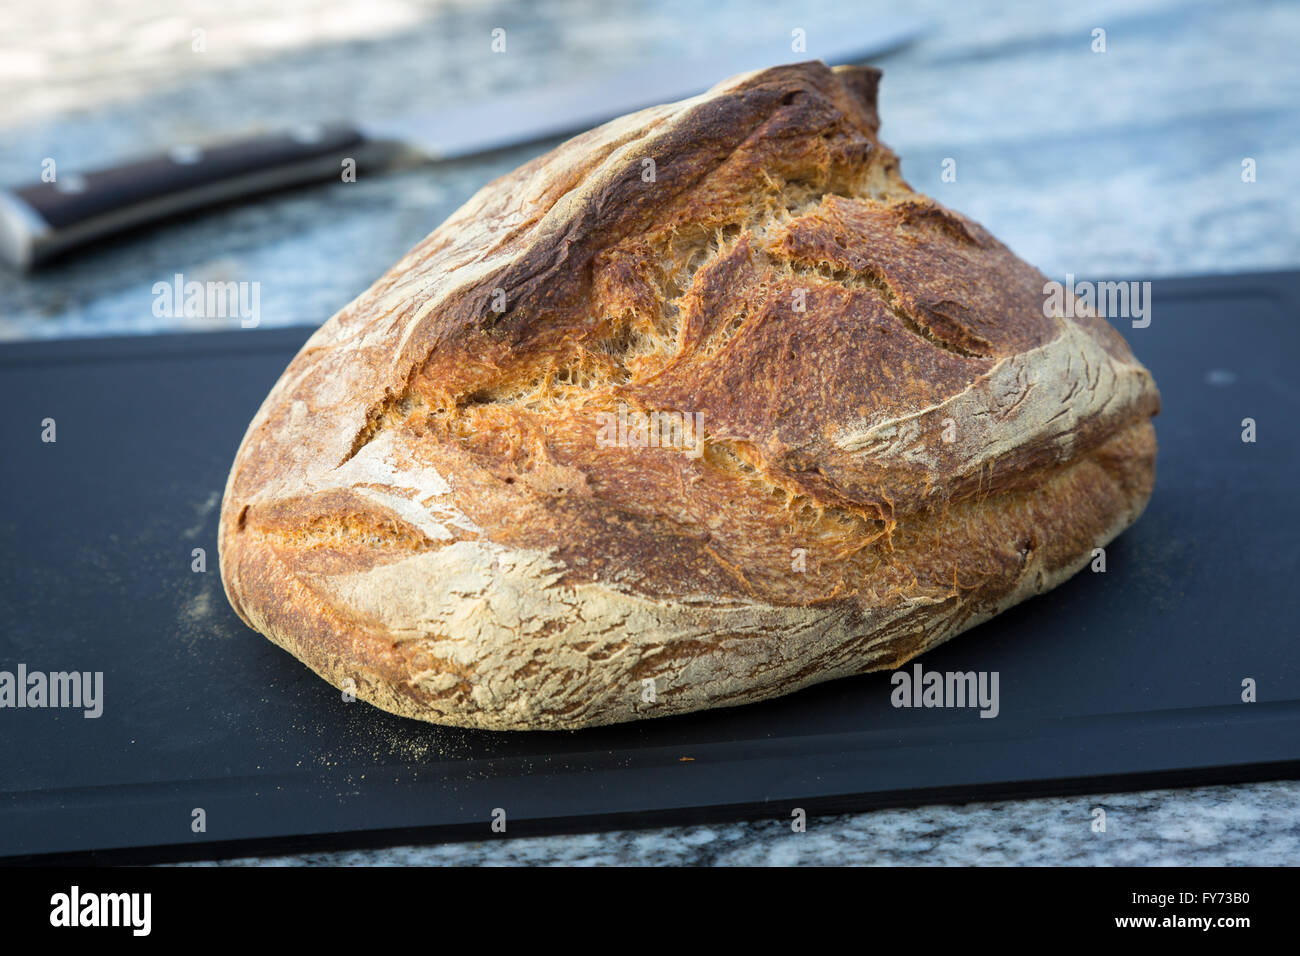 Loaf of fresh oven baked bread Stock Photo